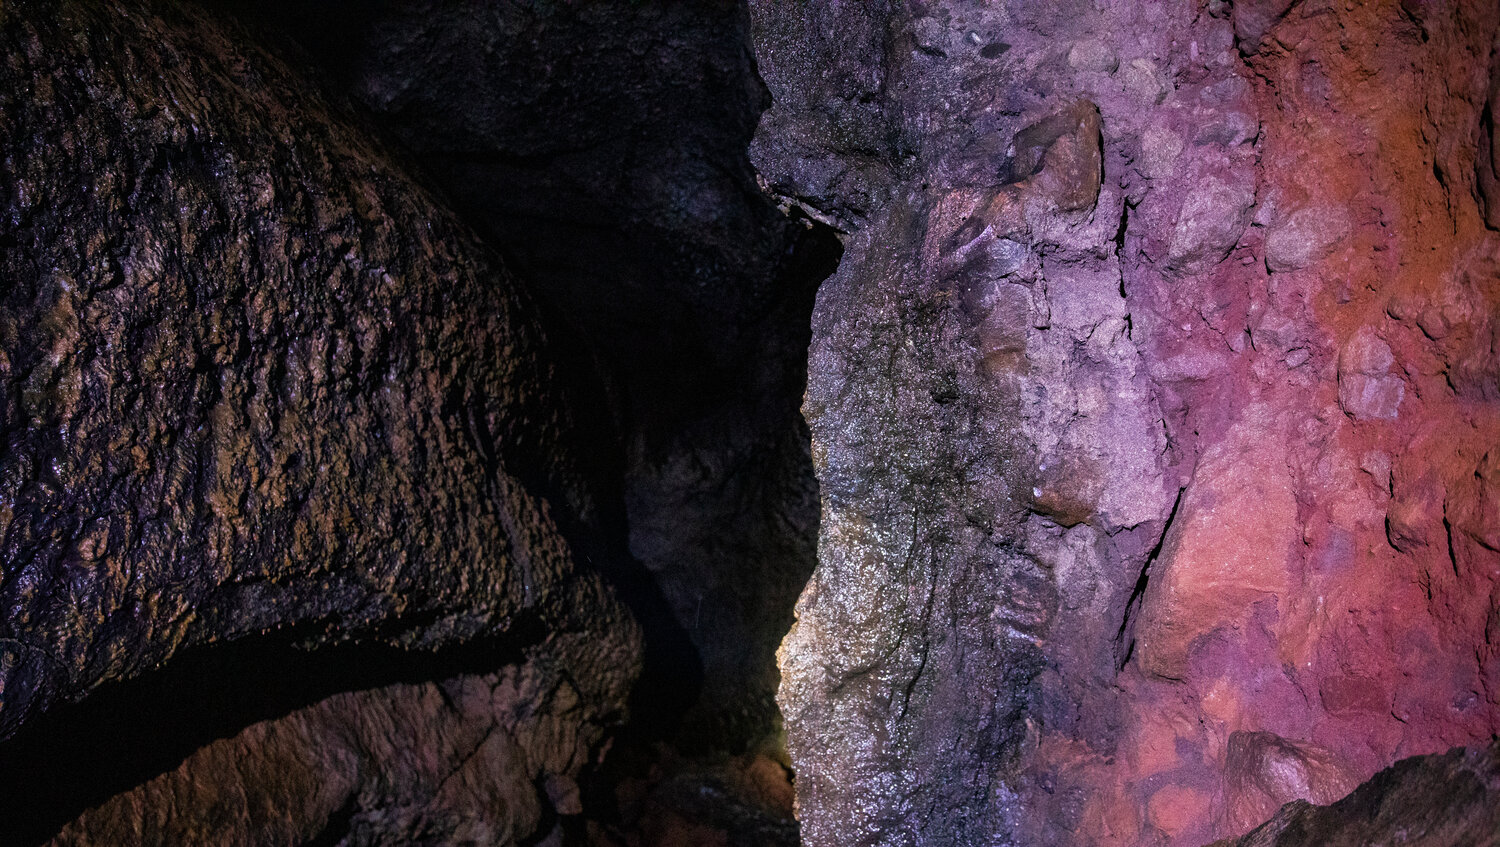 Rocks illuminate with color at the Ape Cave in Cougar on opening day Thursday, May 18.